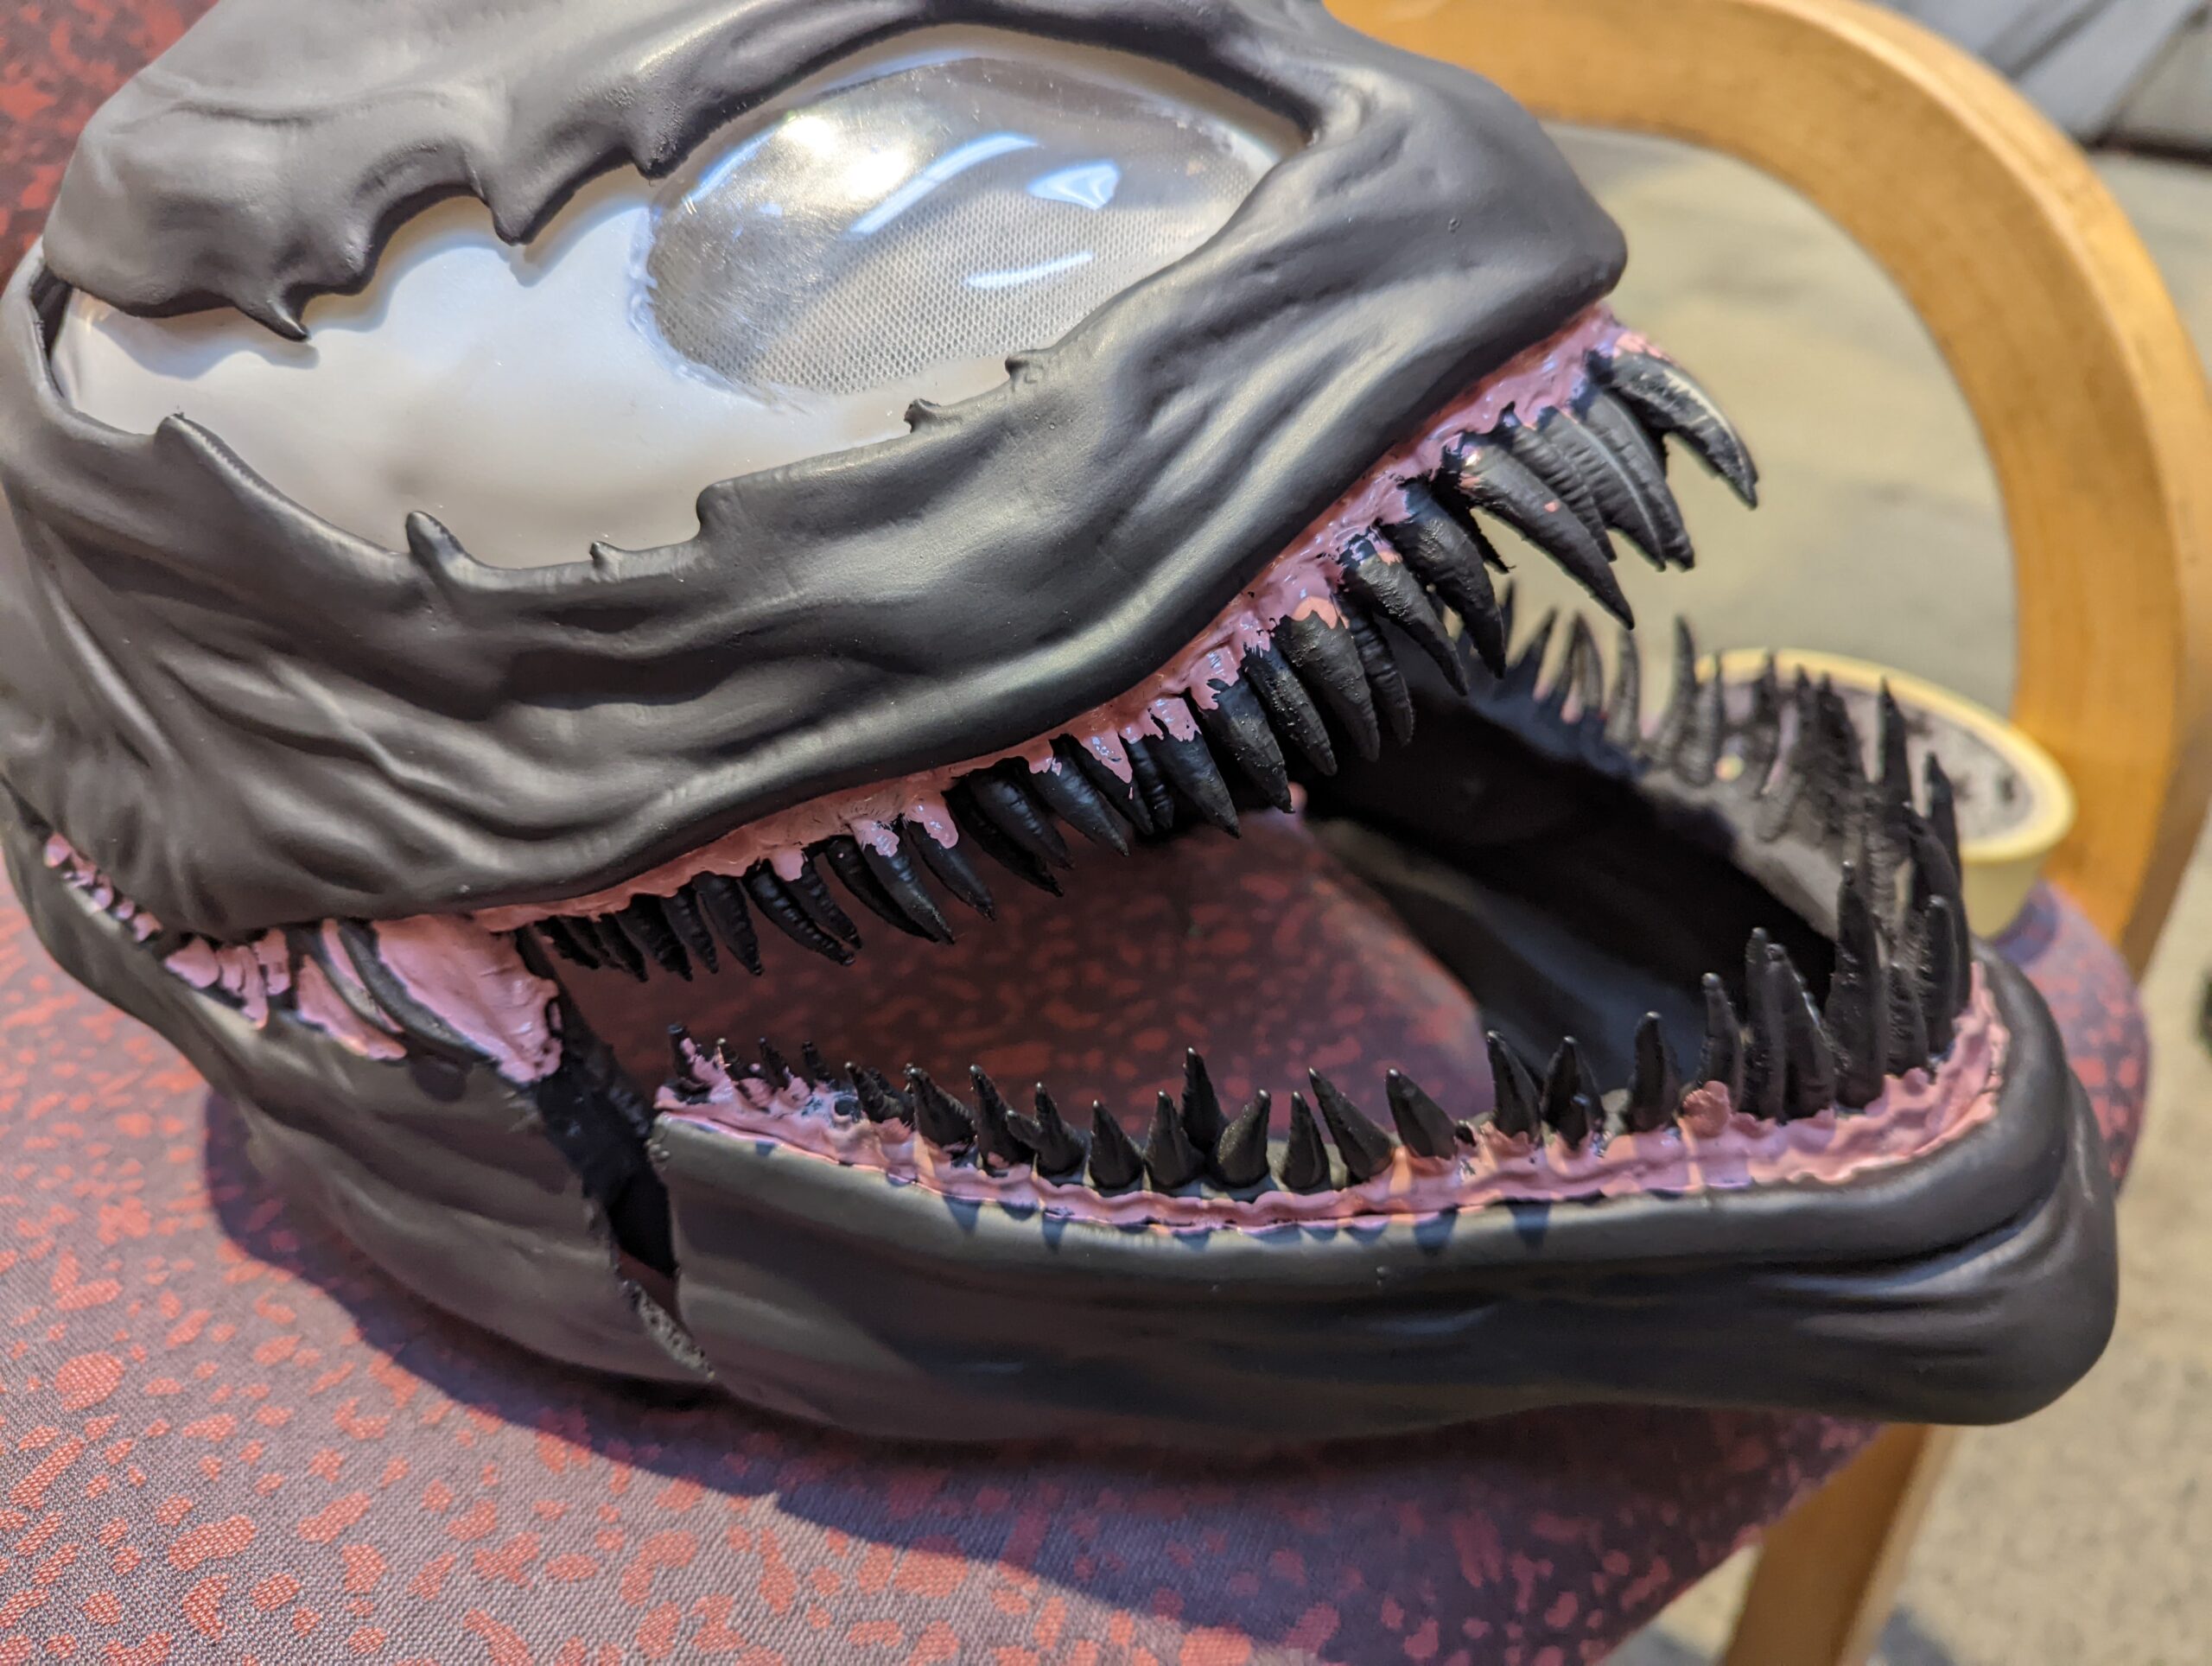 painting gums on mask